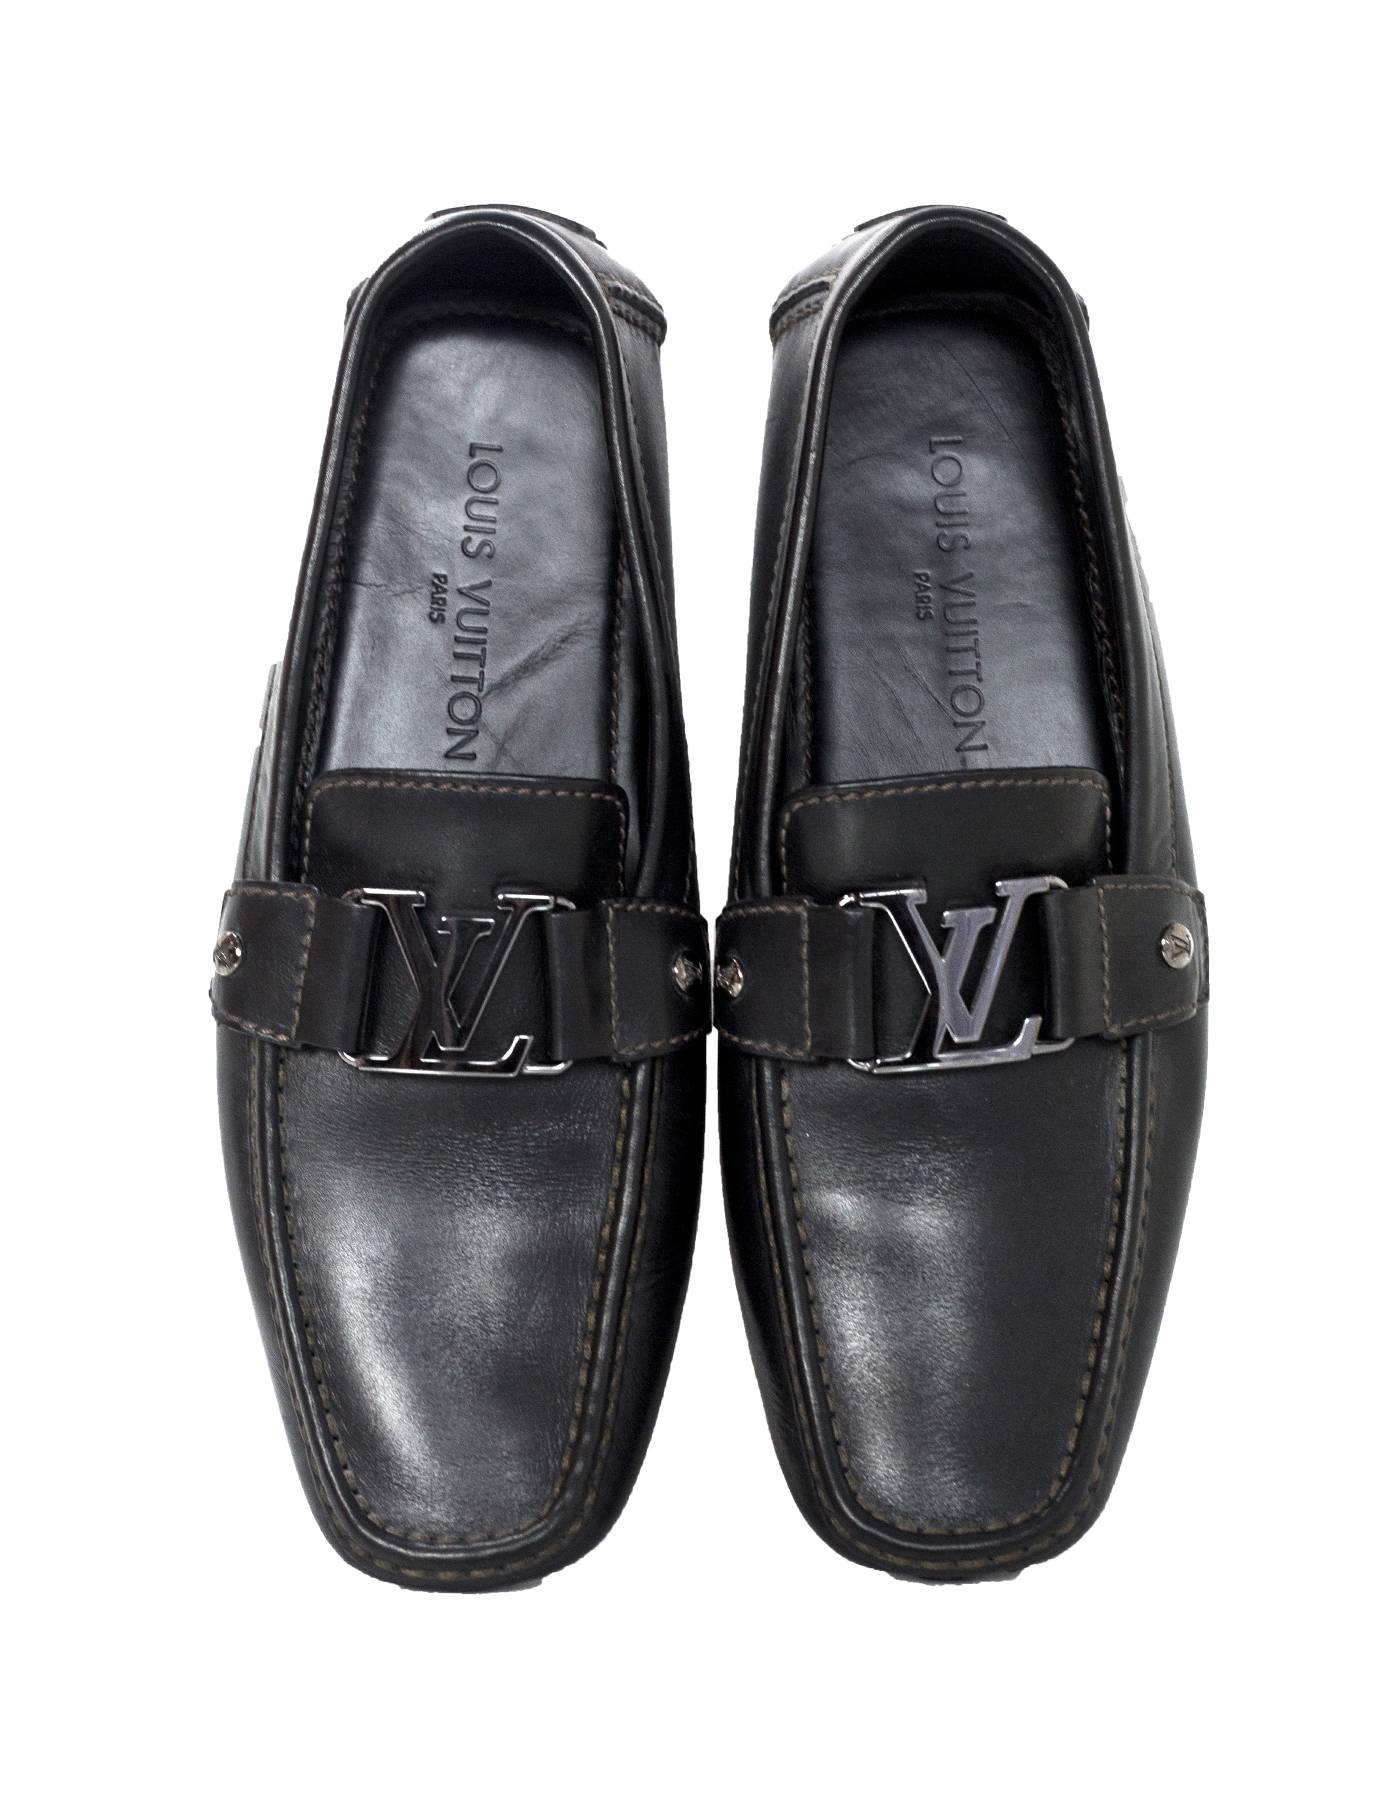 Louis Vuitton Men's Black Leather Monte Carlo Loafers Sz 7.5

Made In: Italy
Color: Black
Materials: Leather
Closure/Opening: Slide on
Sole Stamp: Louis Vuitton Paris
Retail Price: $660 + tax
Overall Condition: Excellent pre-owned condition with the